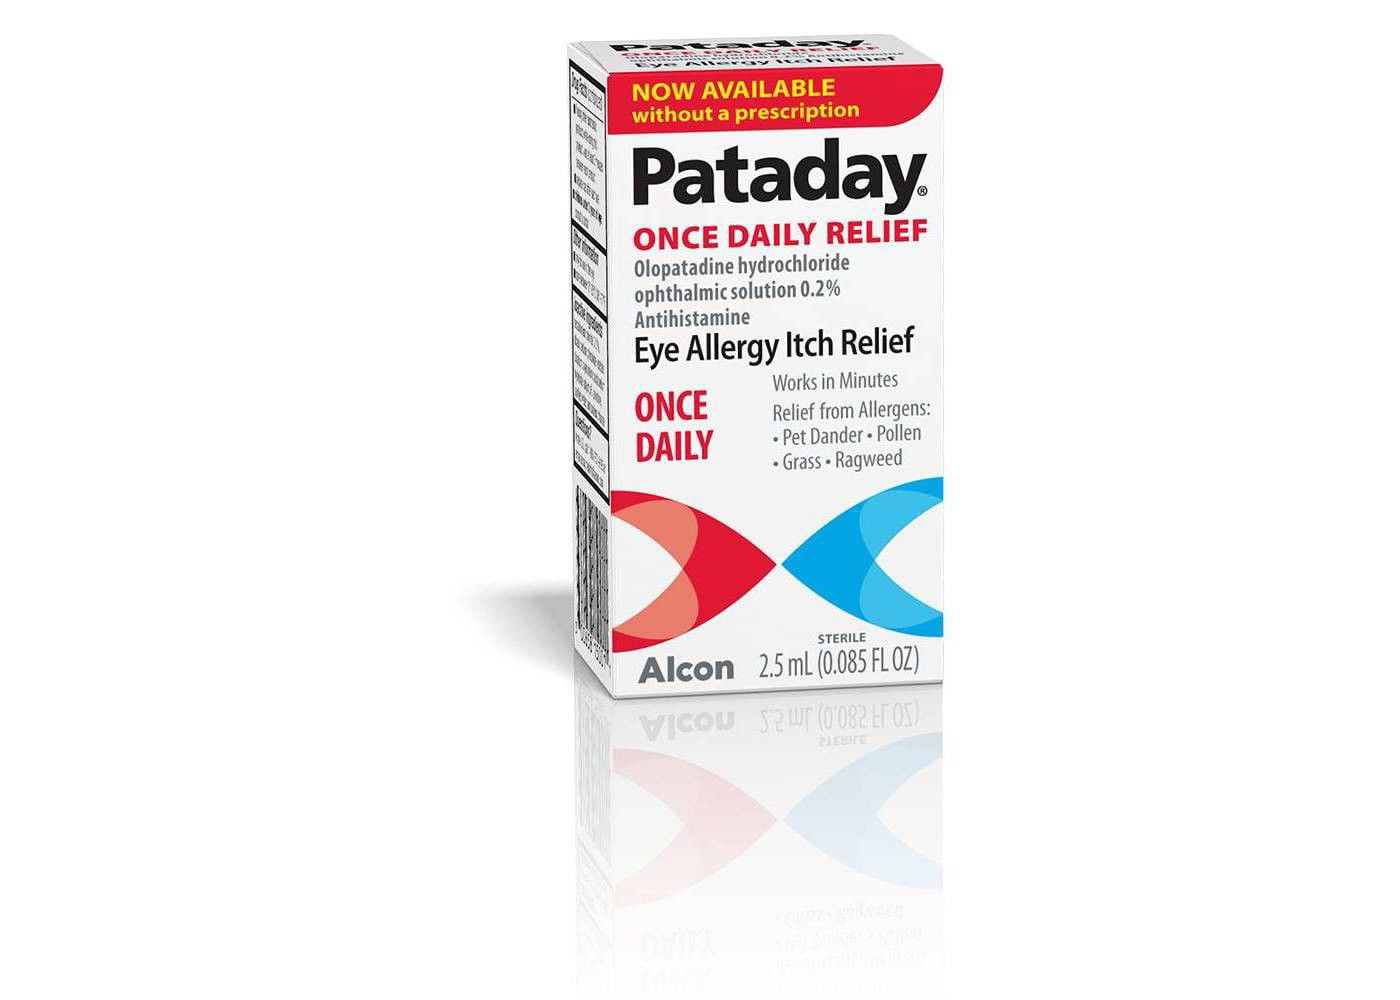 pataday-once-daily-relief-eye-drops-for-eye-allergy-itch-relief-0-085